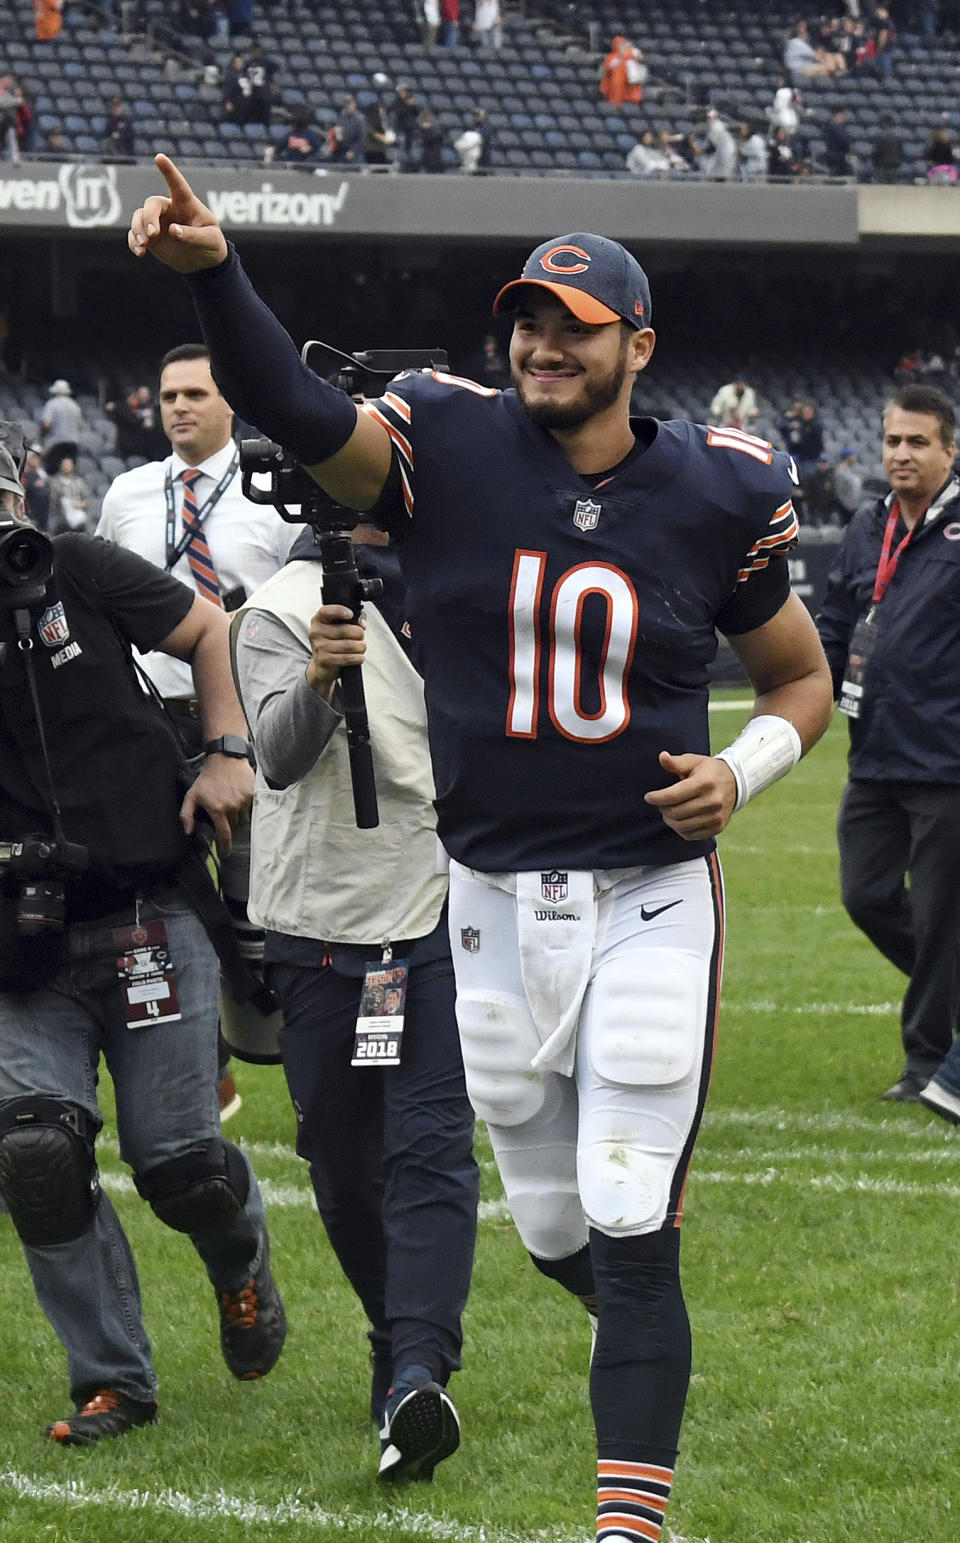 Chicago Bears quarterback Mitchell Trubisky (10) celebrates after an NFL football game against the Tampa Bay Buccaneers Sunday, Sept. 30, 2018, in Chicago. The Bears won 48-10. (AP Photo/David Banks)